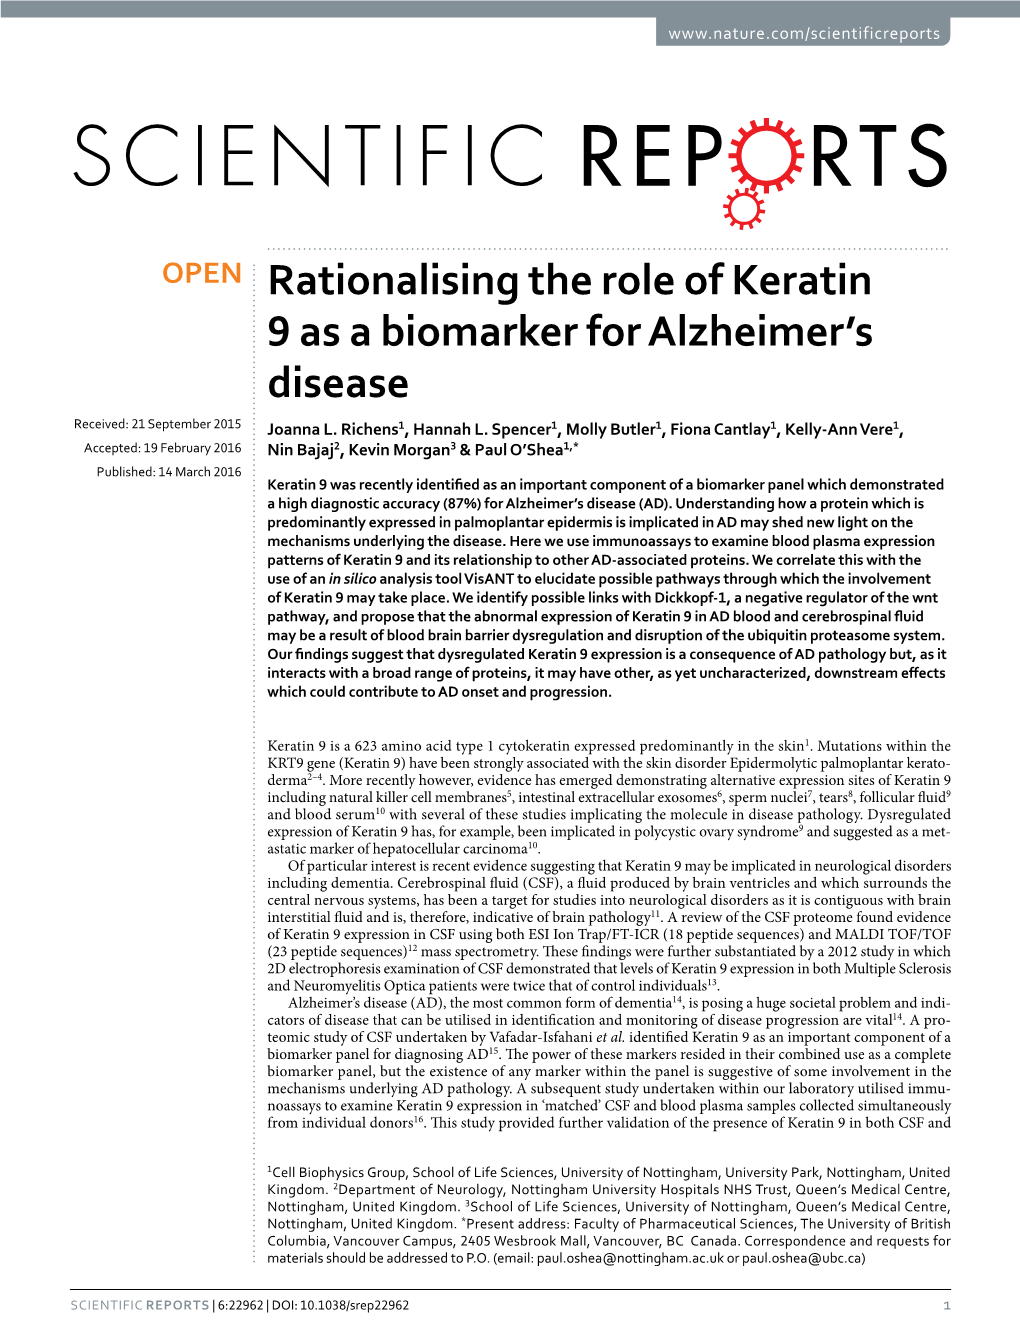 Rationalising the Role of Keratin 9 As a Biomarker for Alzheimer's Disease